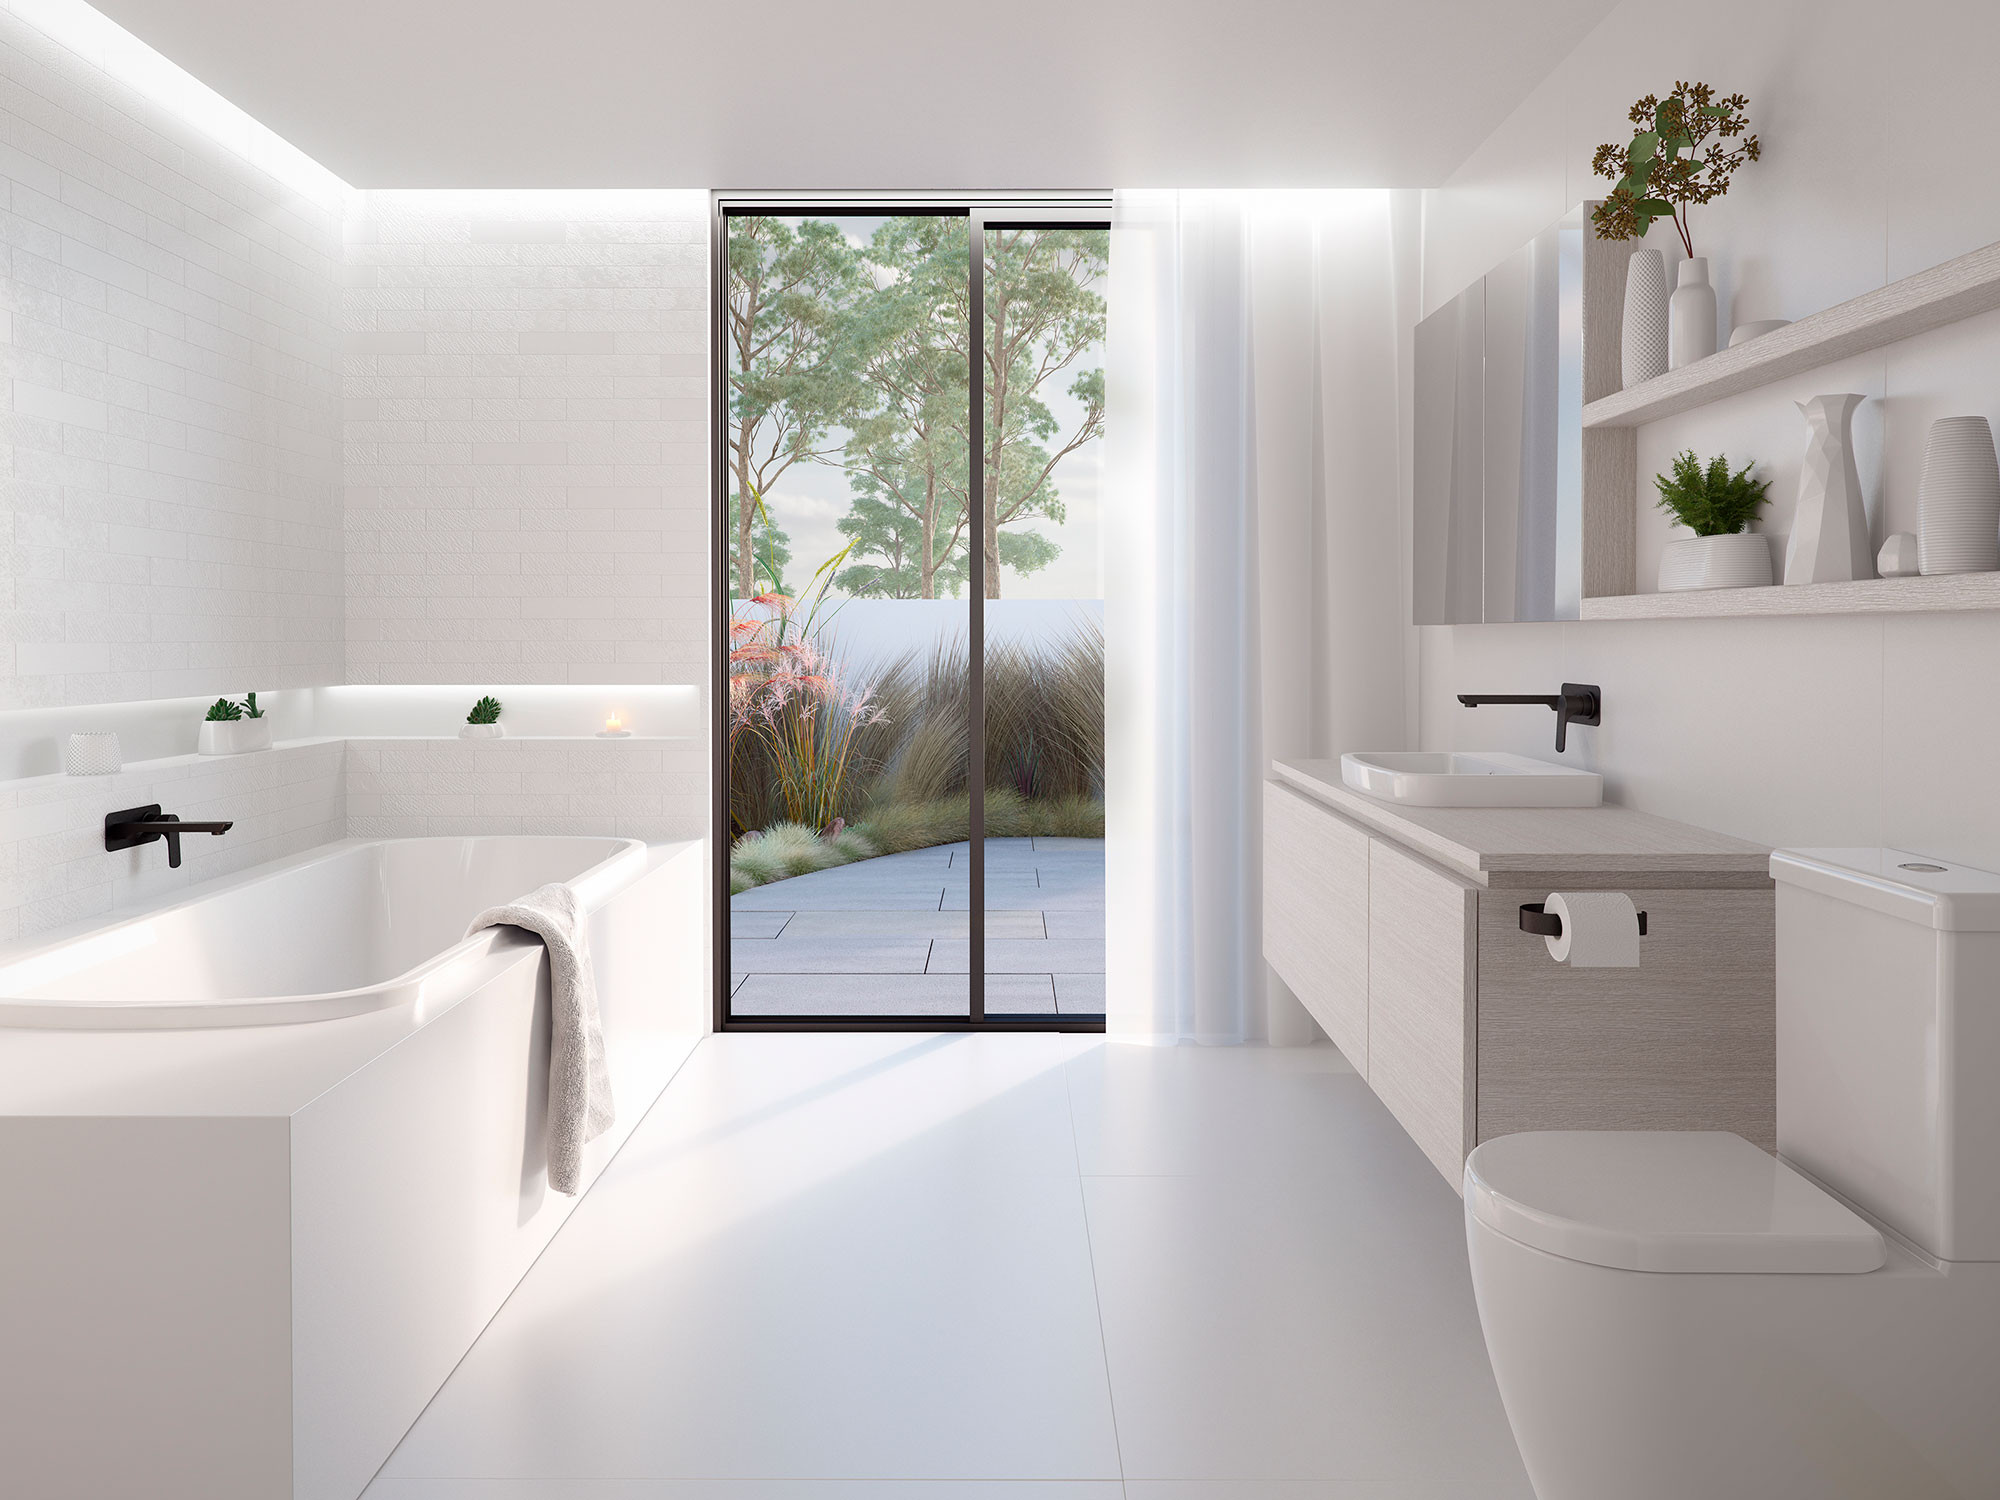 Latest Bathroom Designs
 2019 Review The Latest & Greatest in Bathroom Design